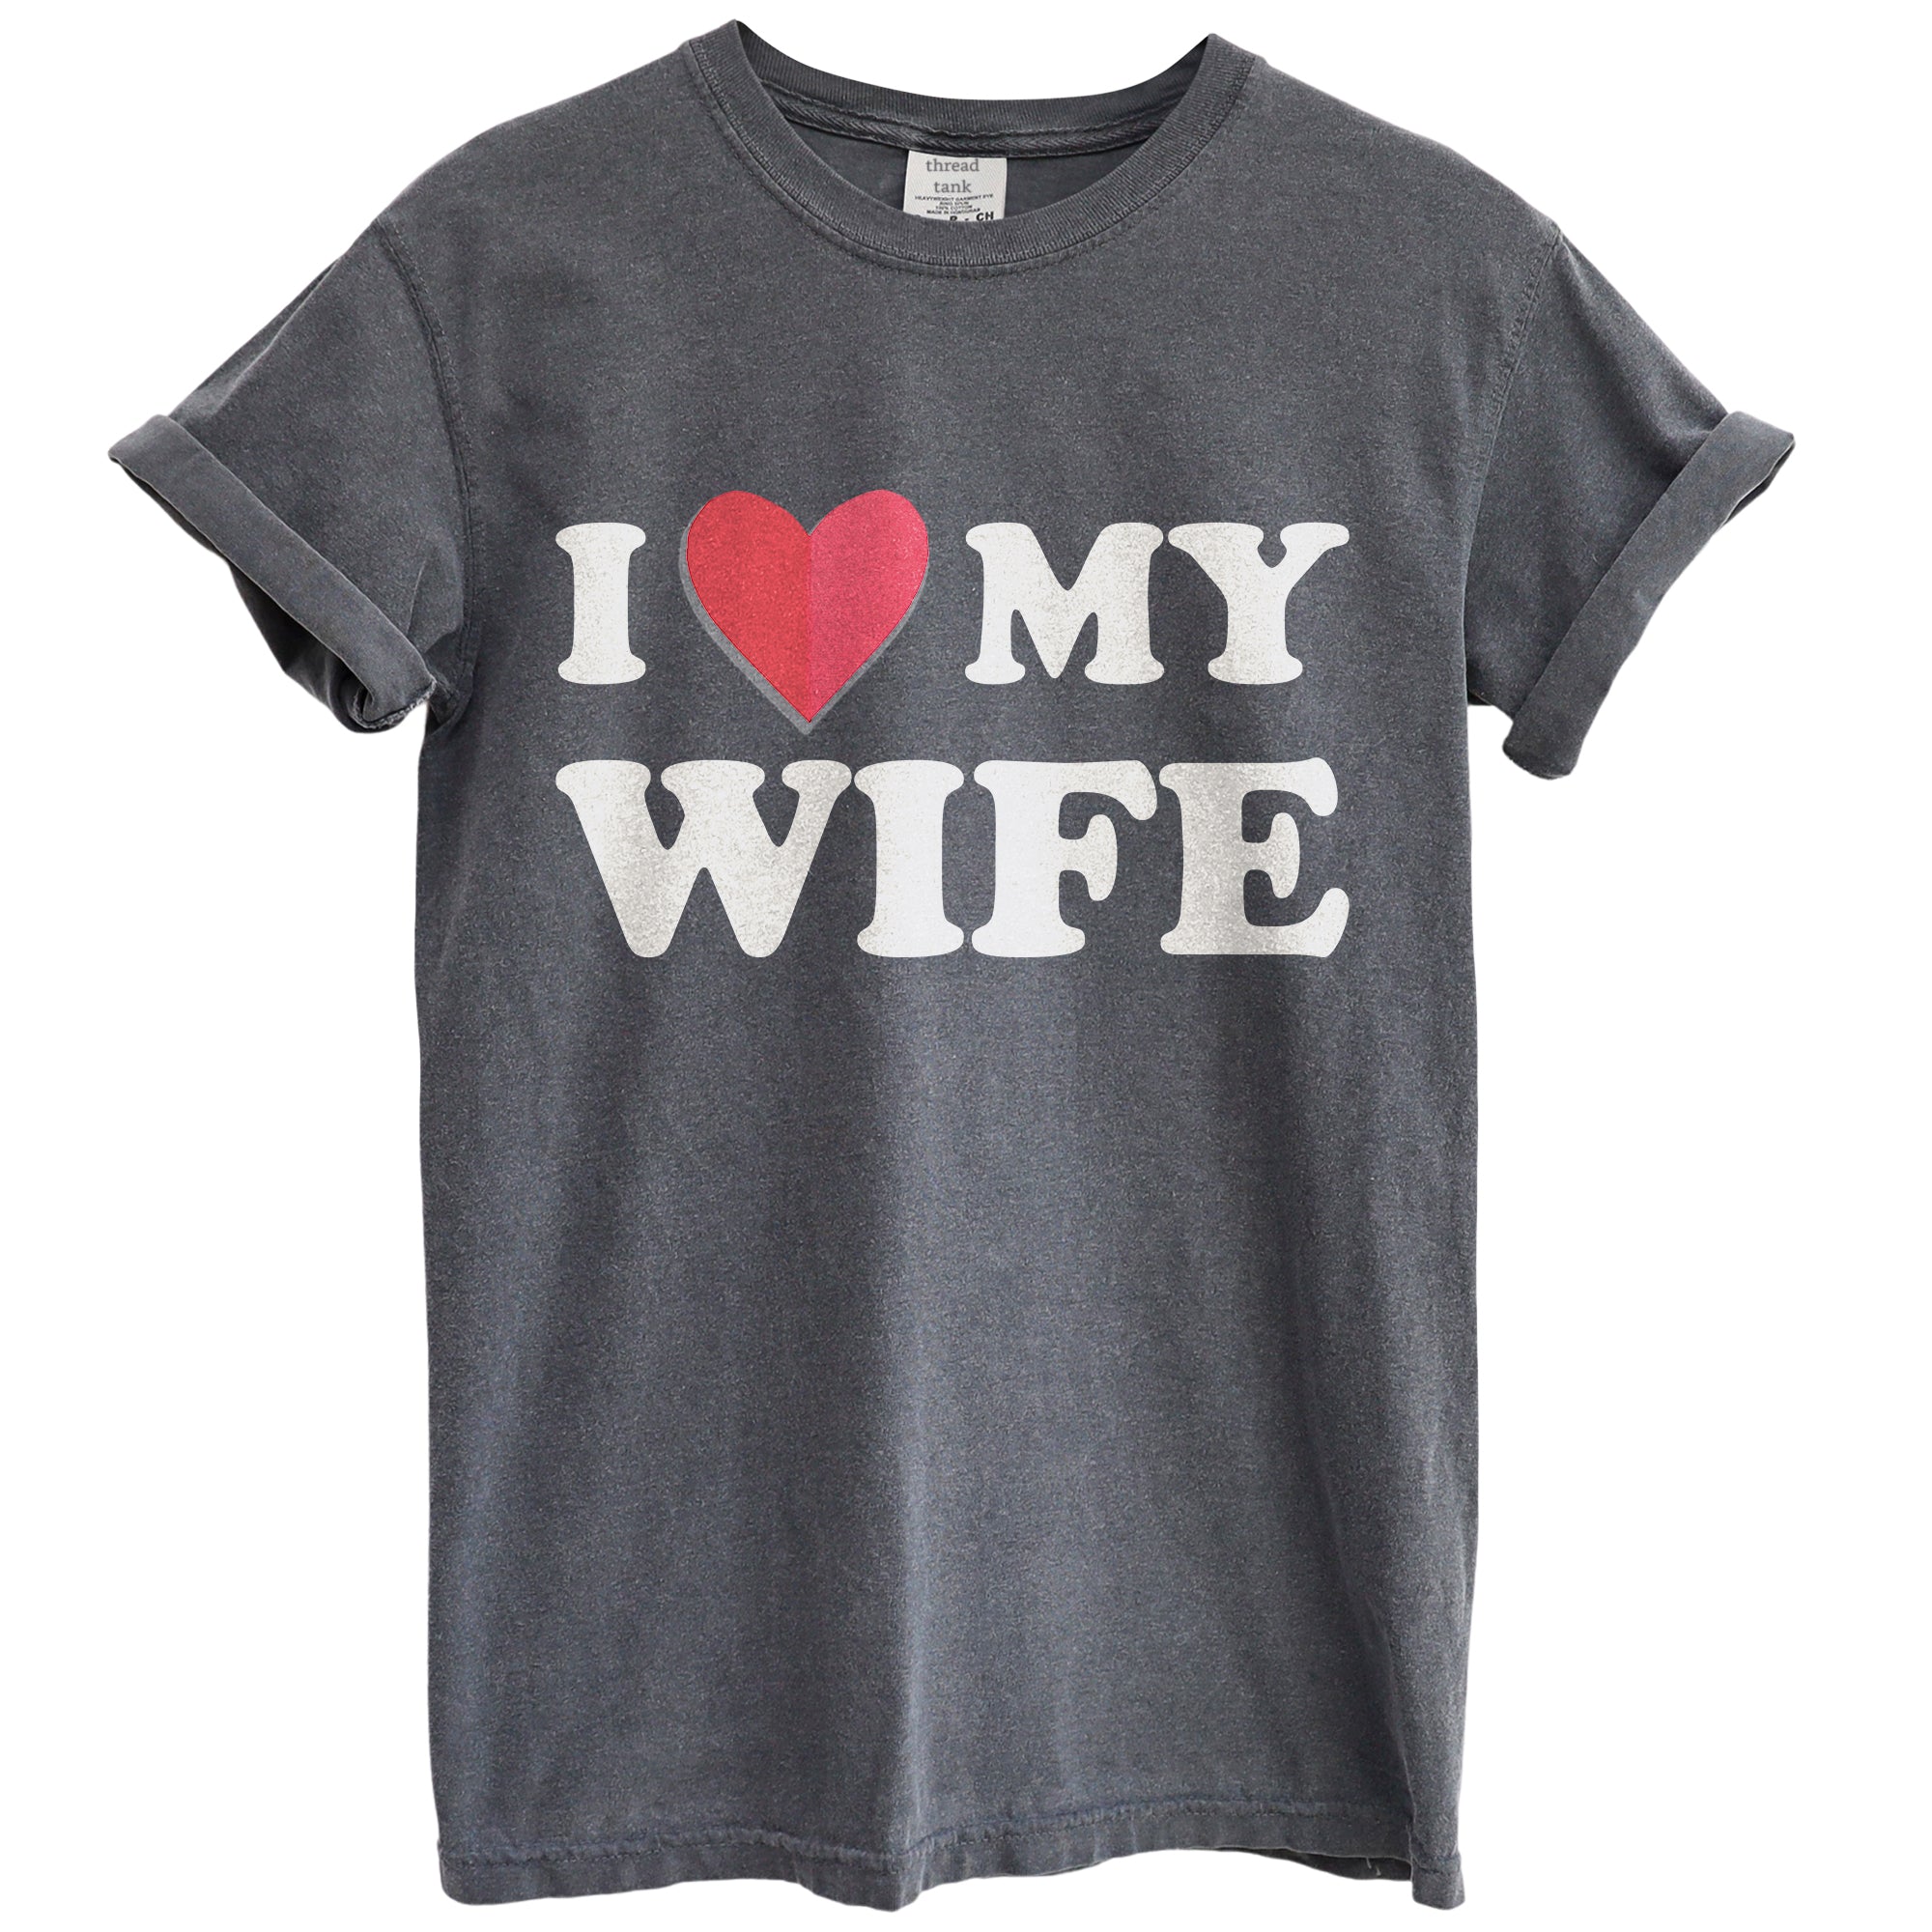 I Love My Wife Shirt Garment-Dyed Tee Graphic T-Shirt